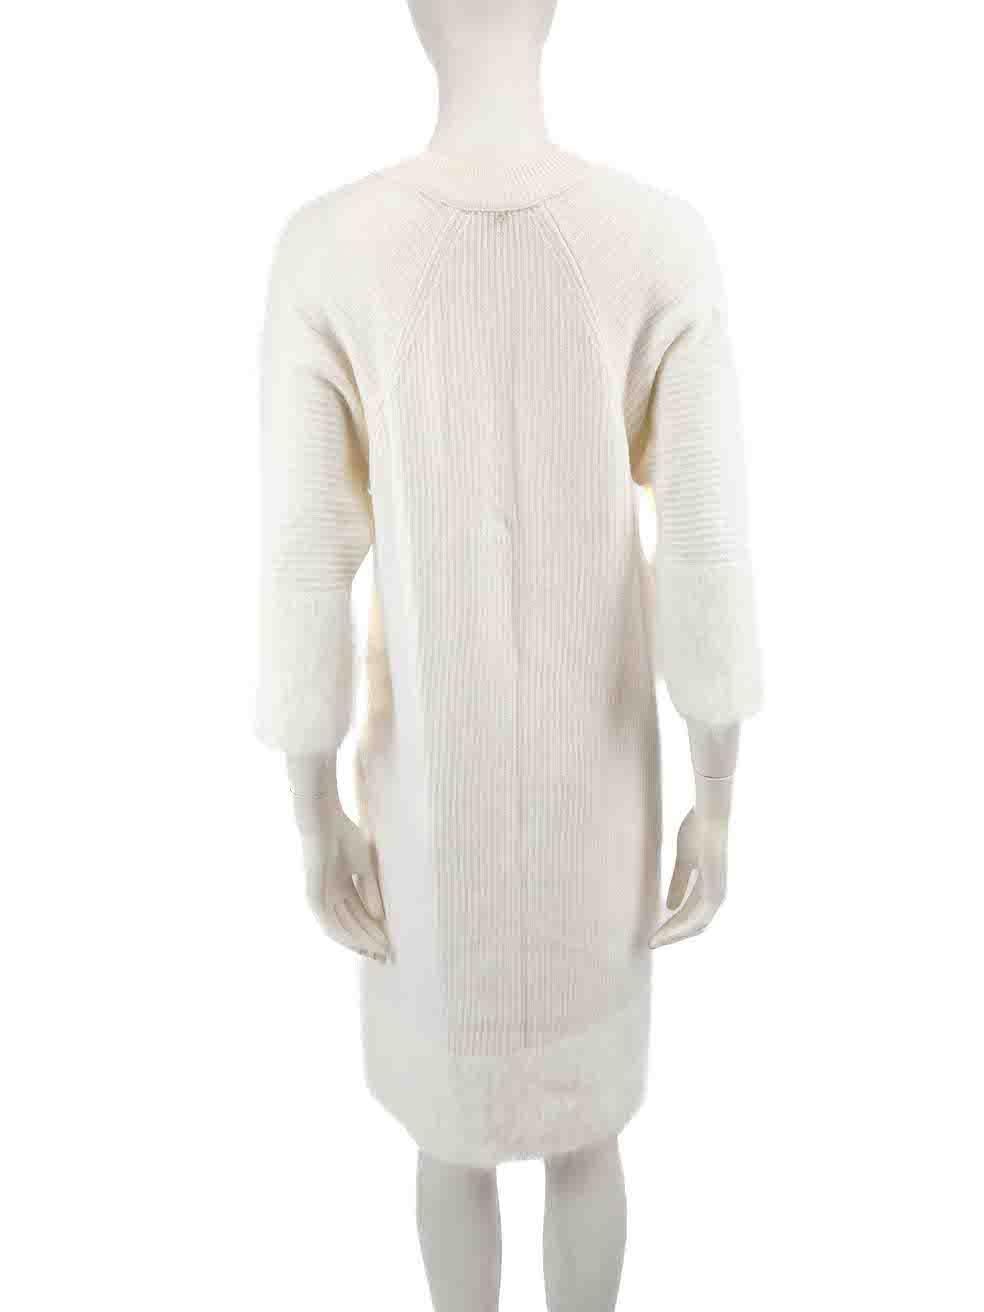 Lorena Antoniazzi White Brushed Knit Dress Size M In Good Condition For Sale In London, GB